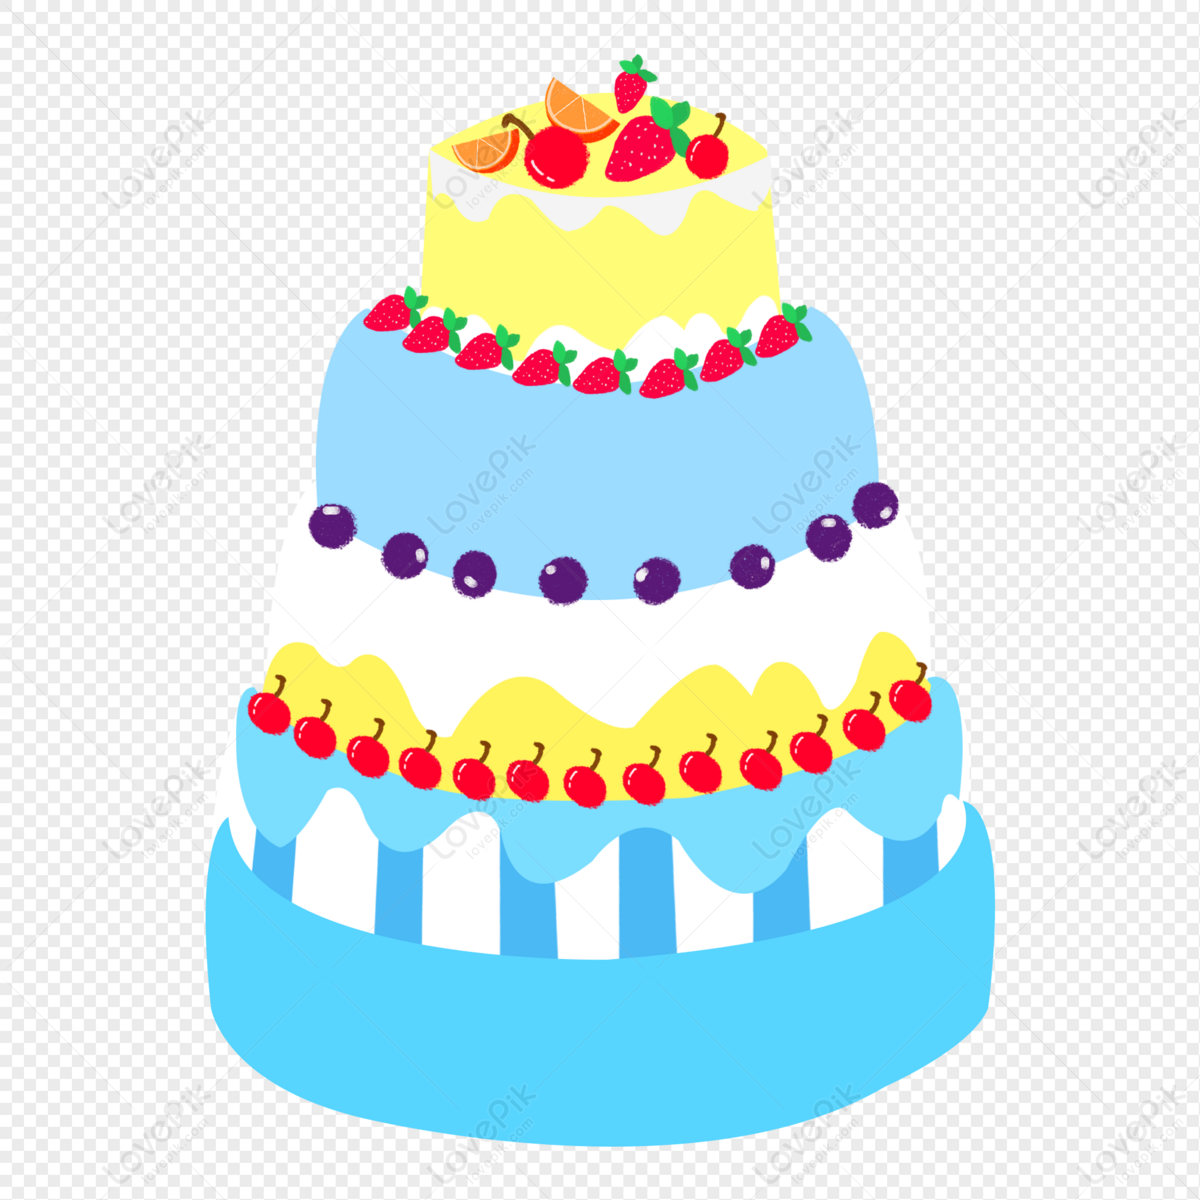 Three Layer Cake PNG Hd Transparent Image And Clipart Image For ...